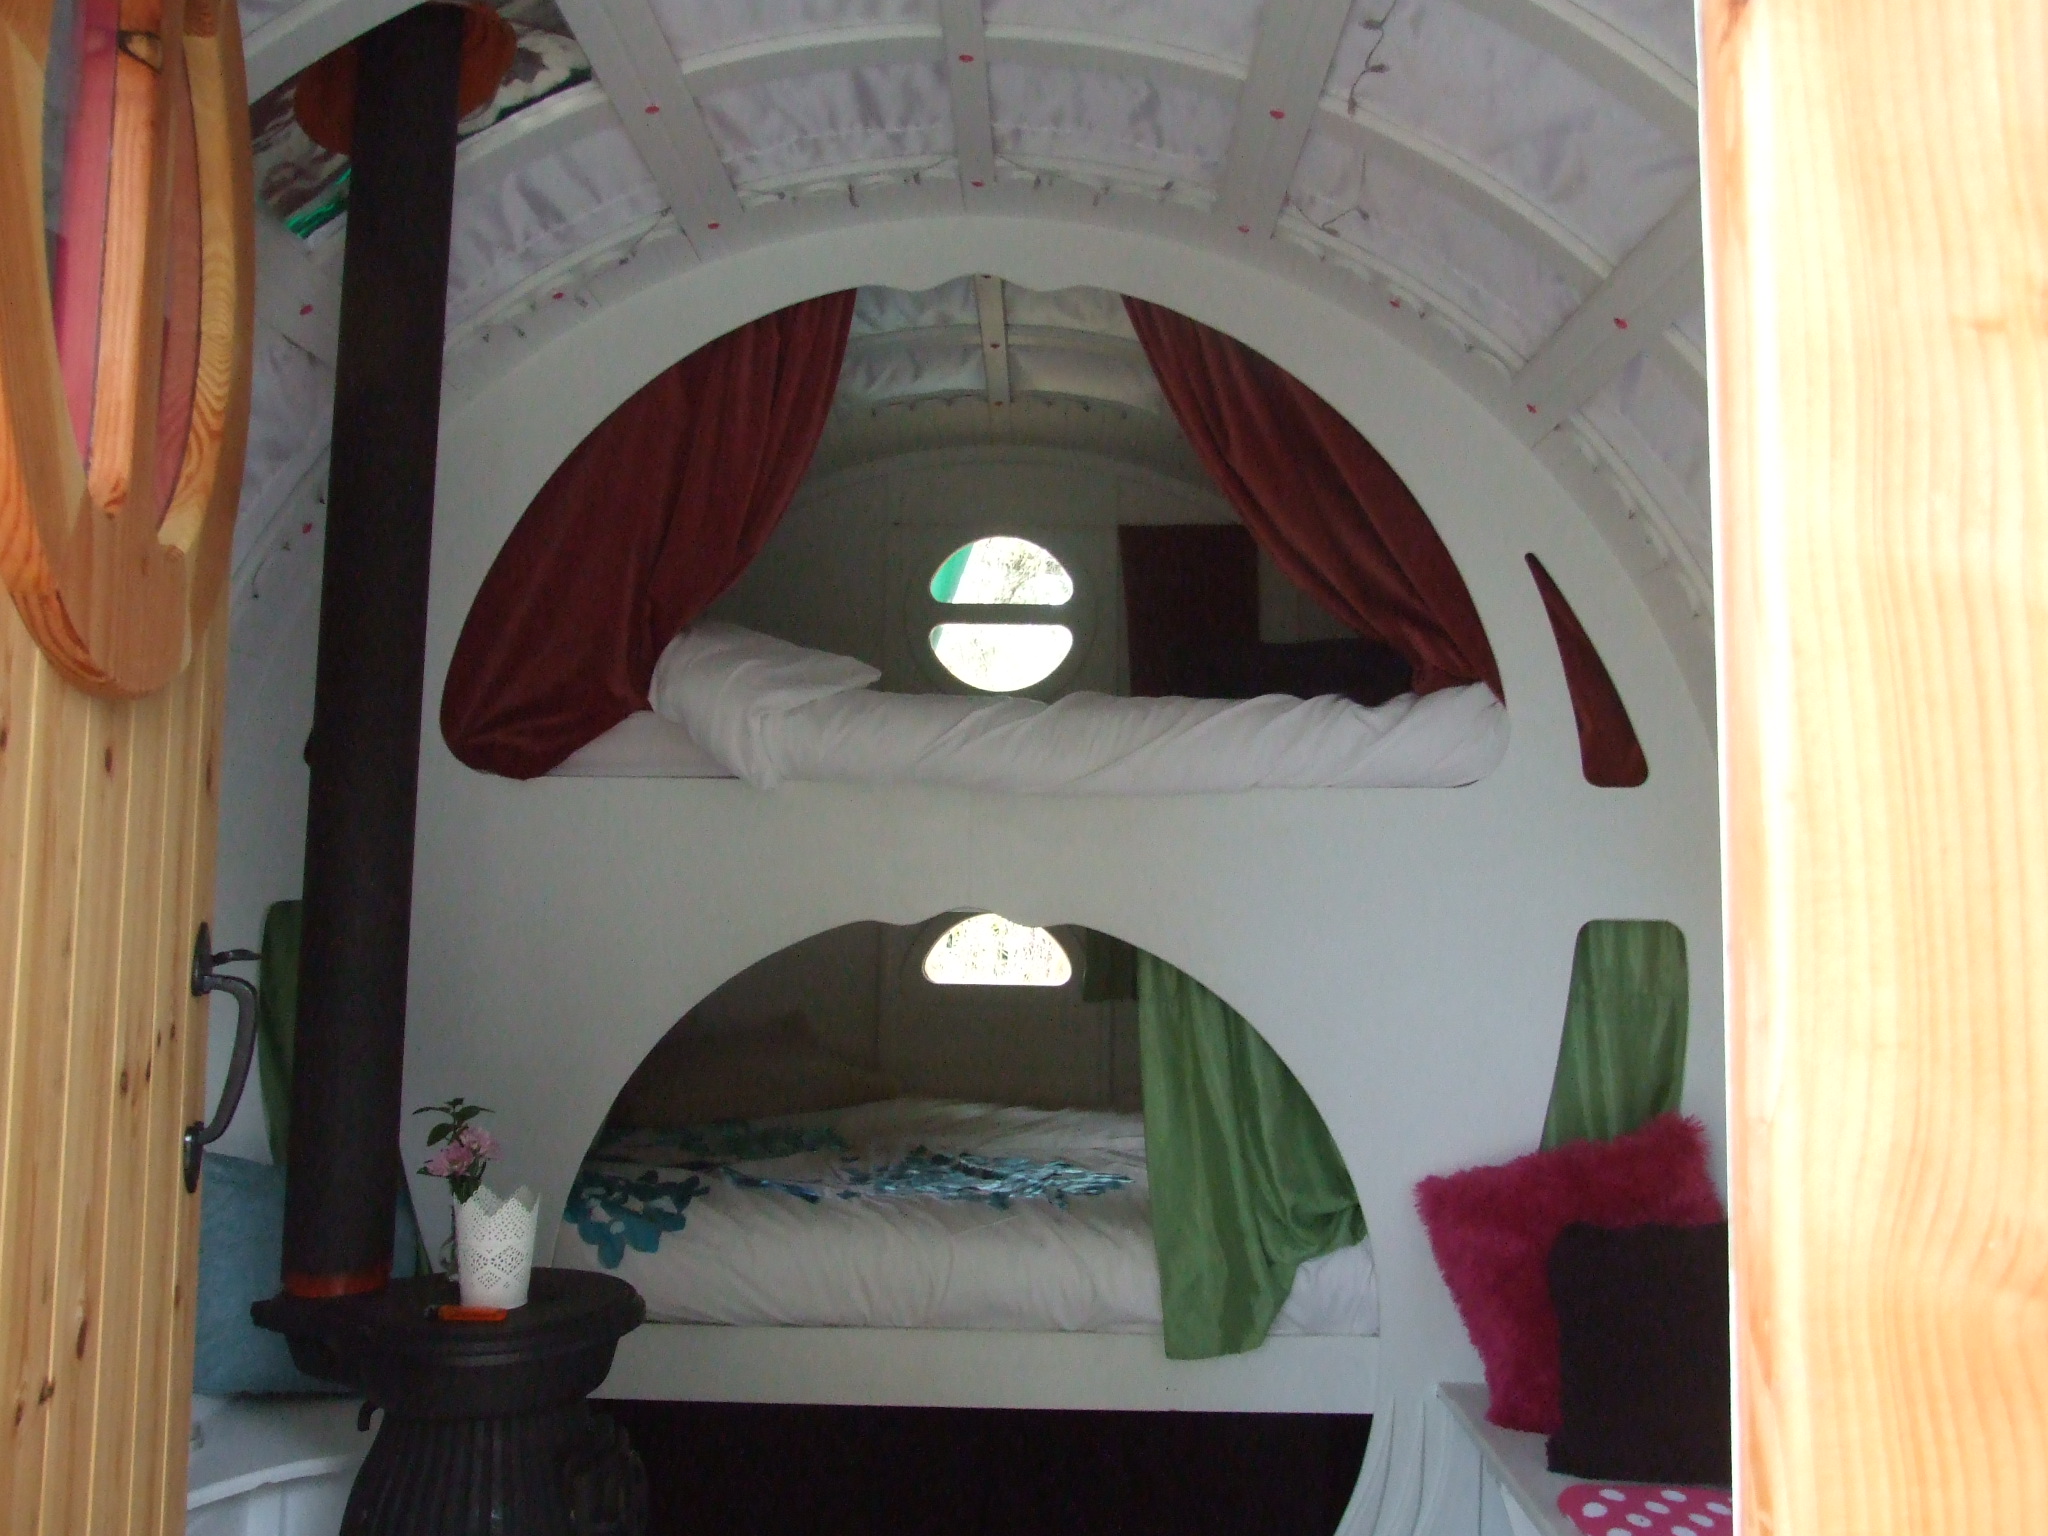 The Gypsy Wagon And Teepee Accommodation Check Availbility